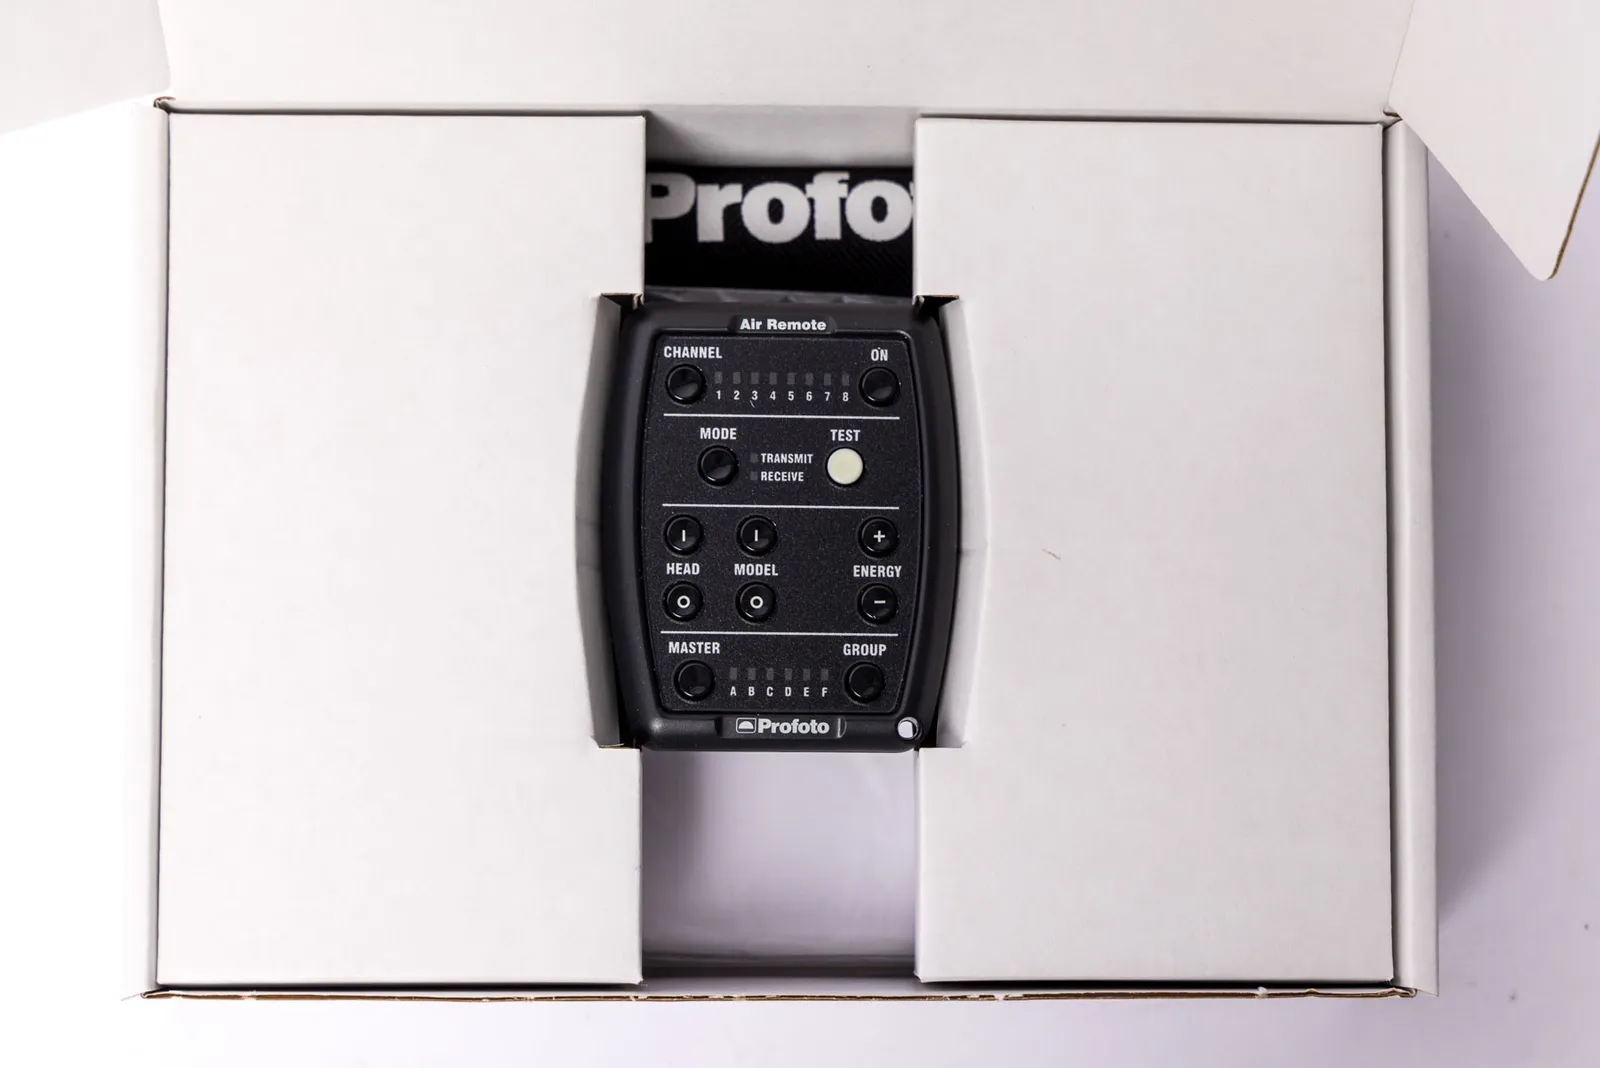 Profoto Air Remote From Arne's Gear Shop On Gear Focus